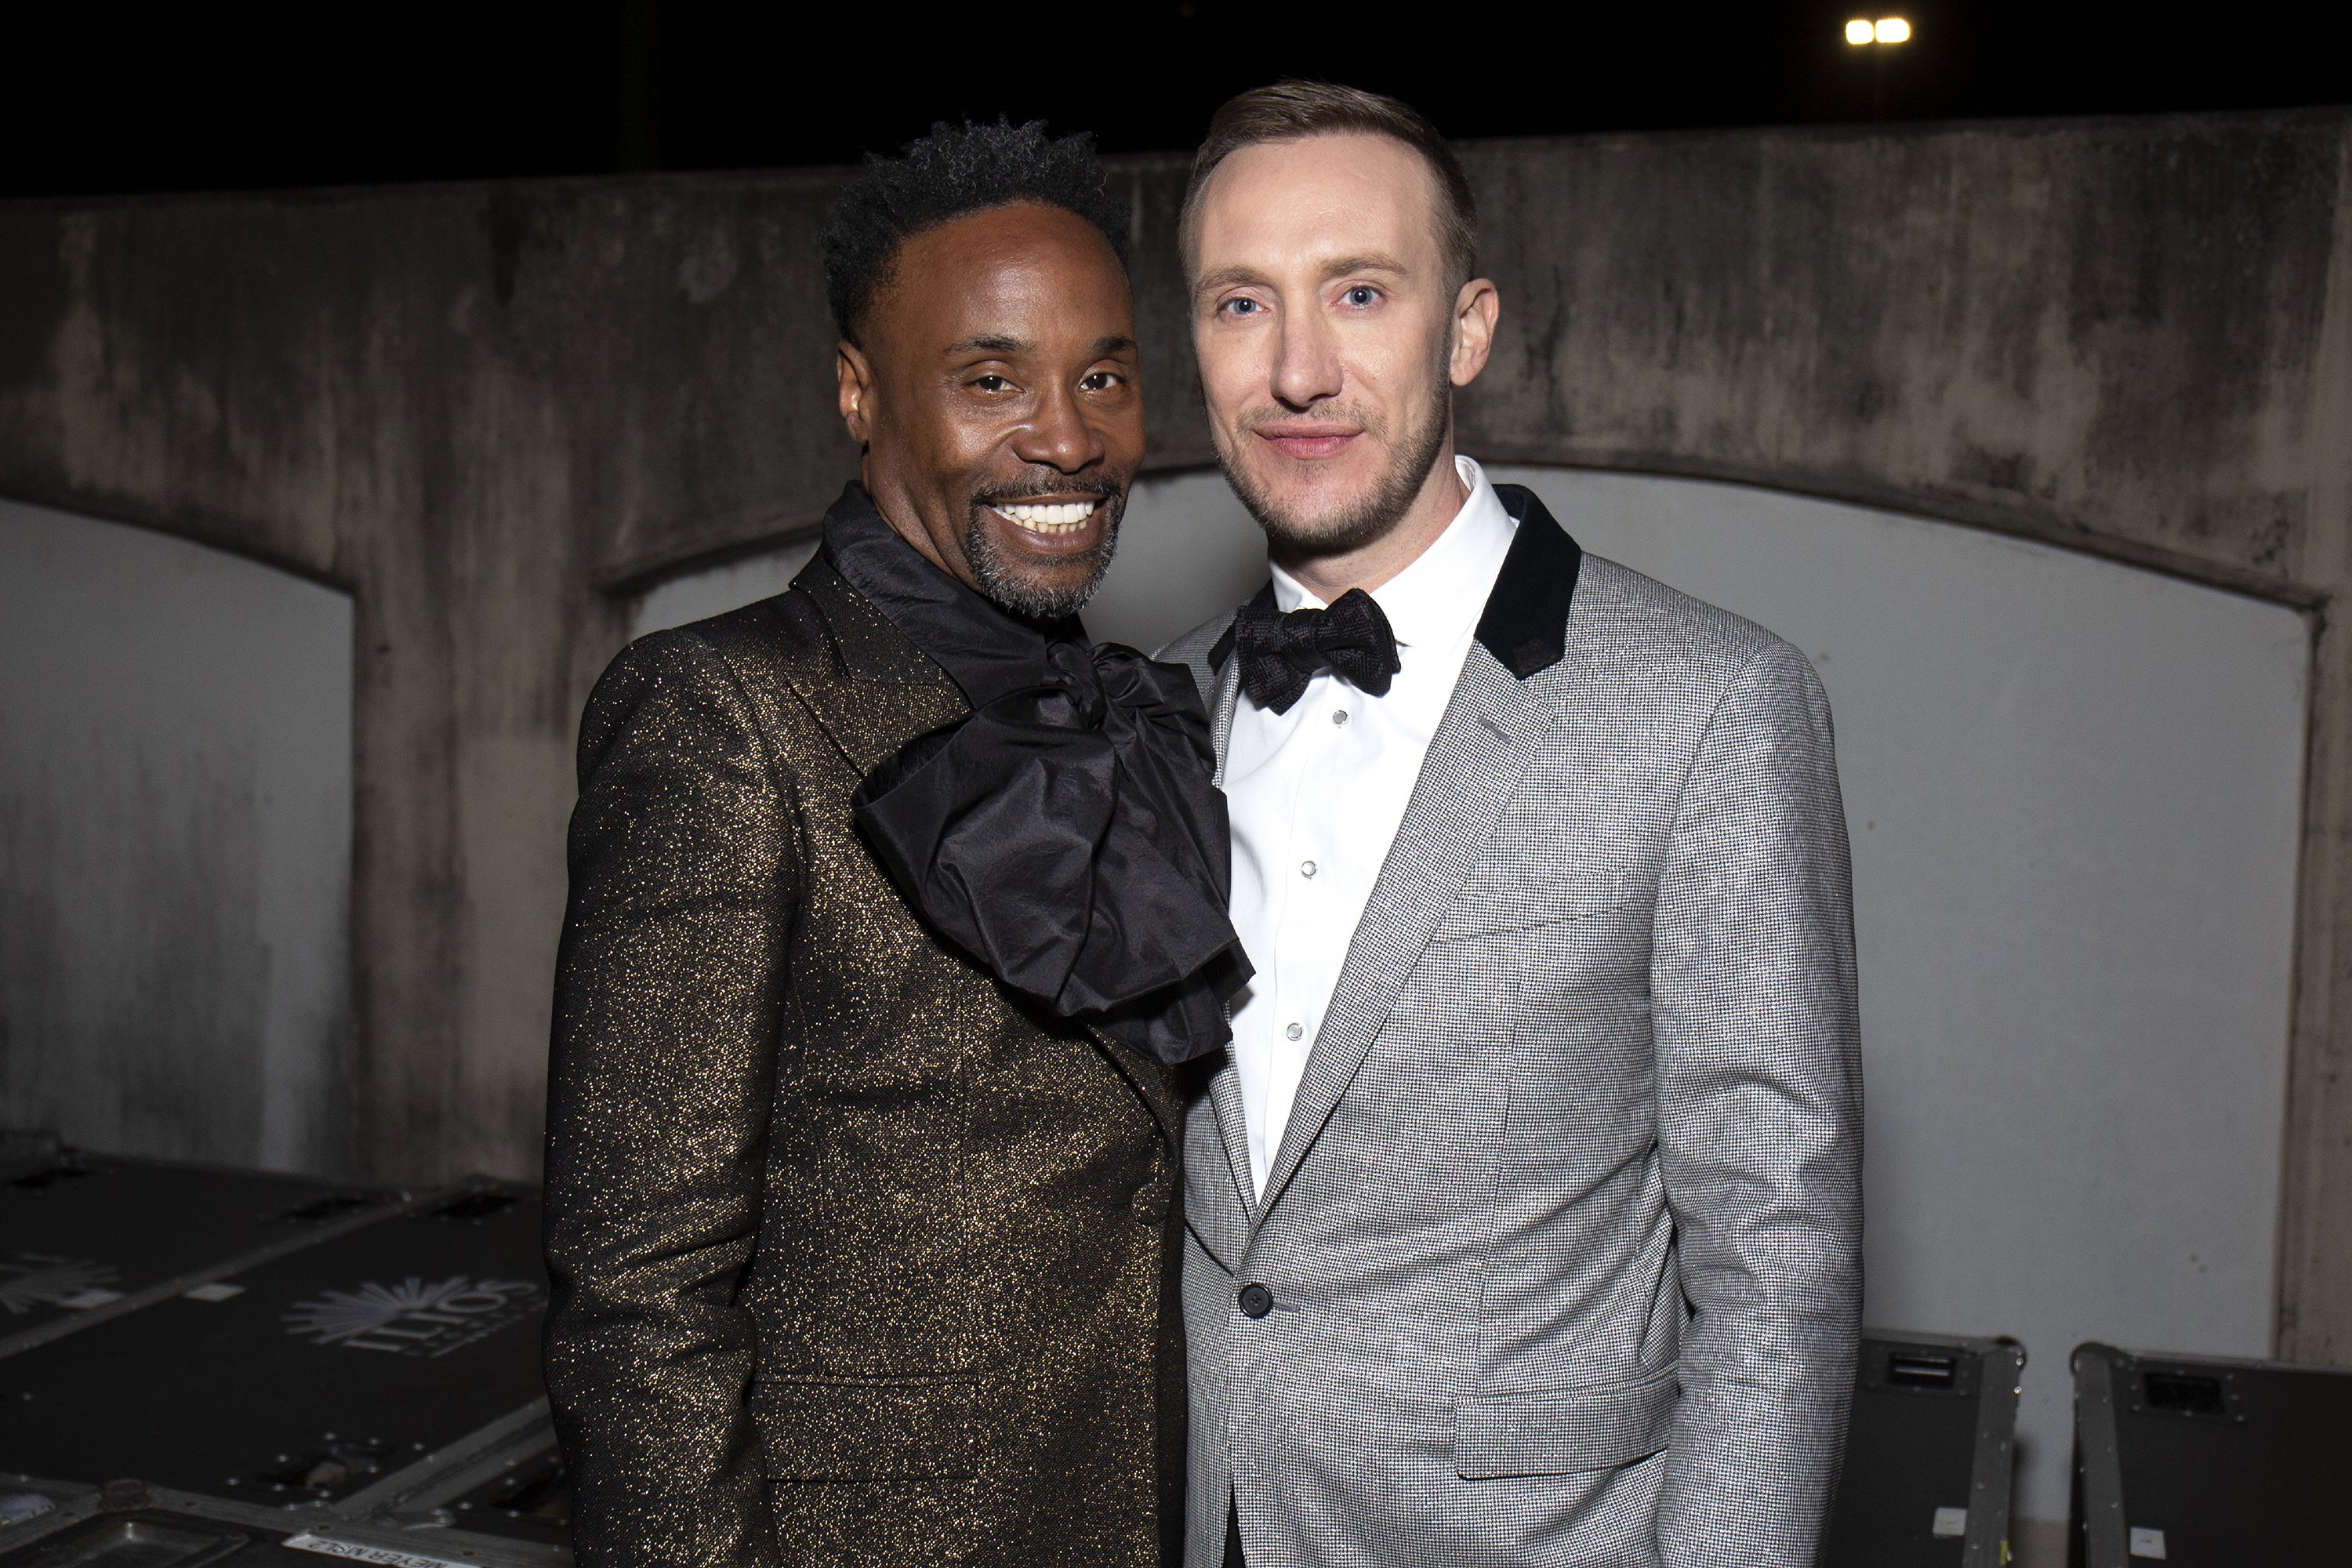 Billy Porter and Adam Porter-Smith attending Dick Clark's New Year's Rockin' Eve Celebratiion in New Orleans City, in December 2019. | Image: Getty Images.